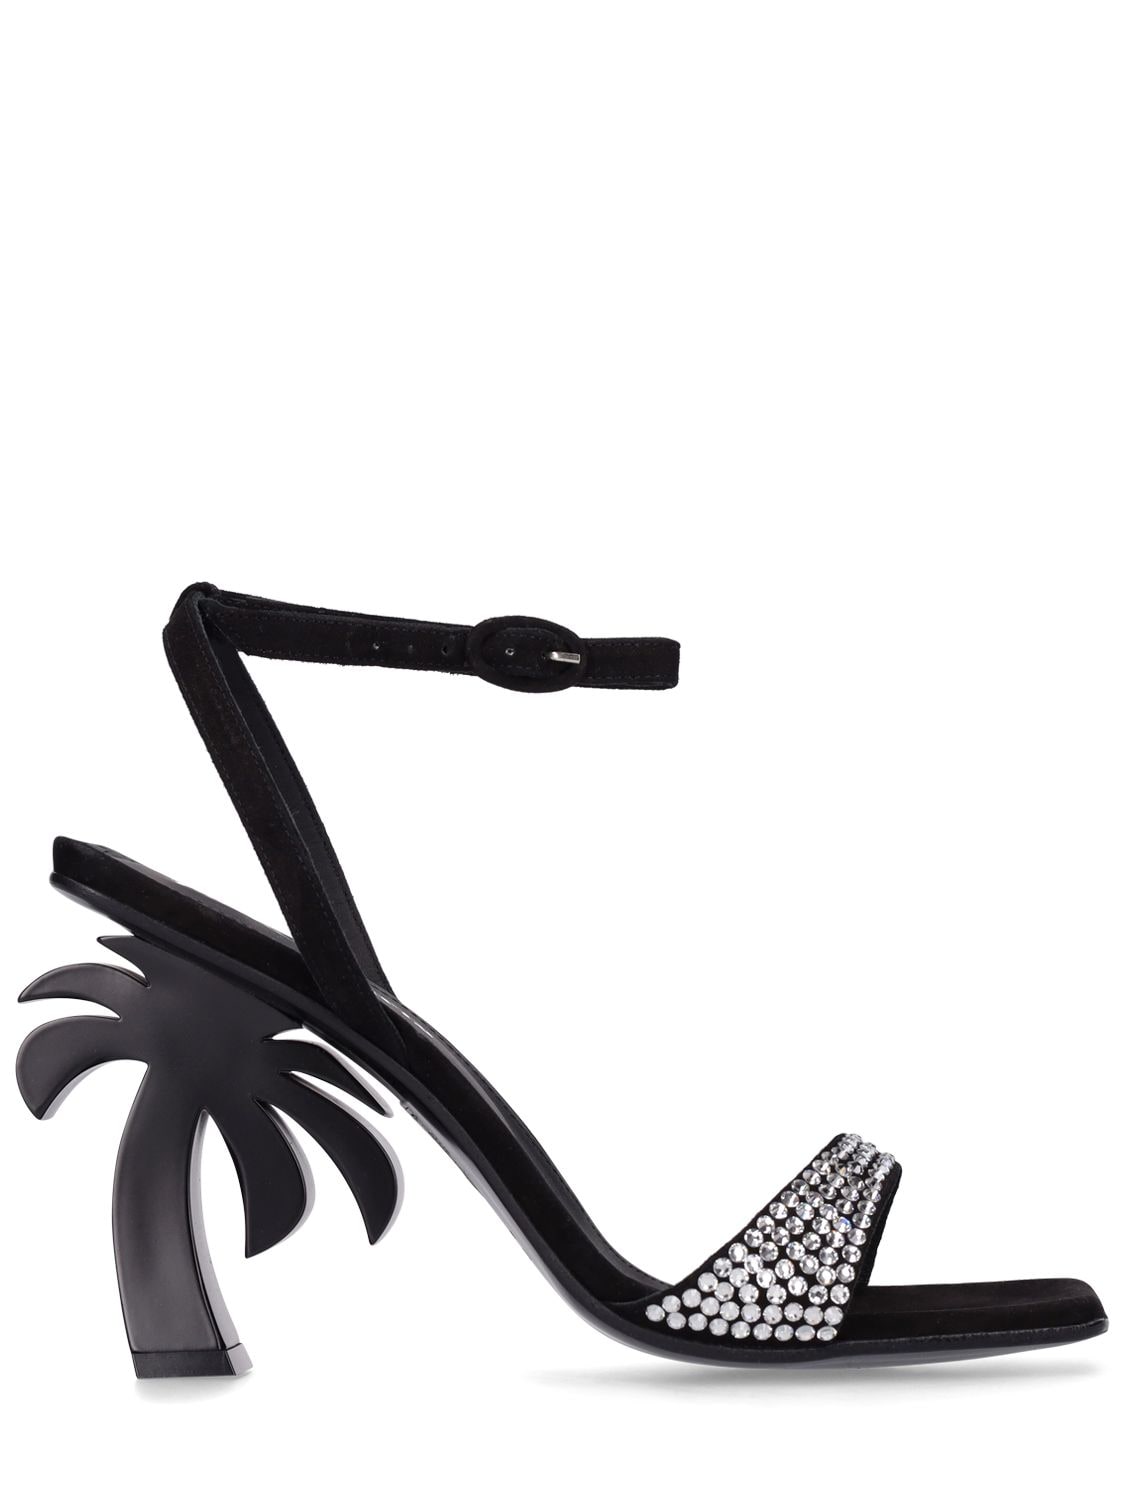 110mm Palm Heel Strass & Leather Sandals